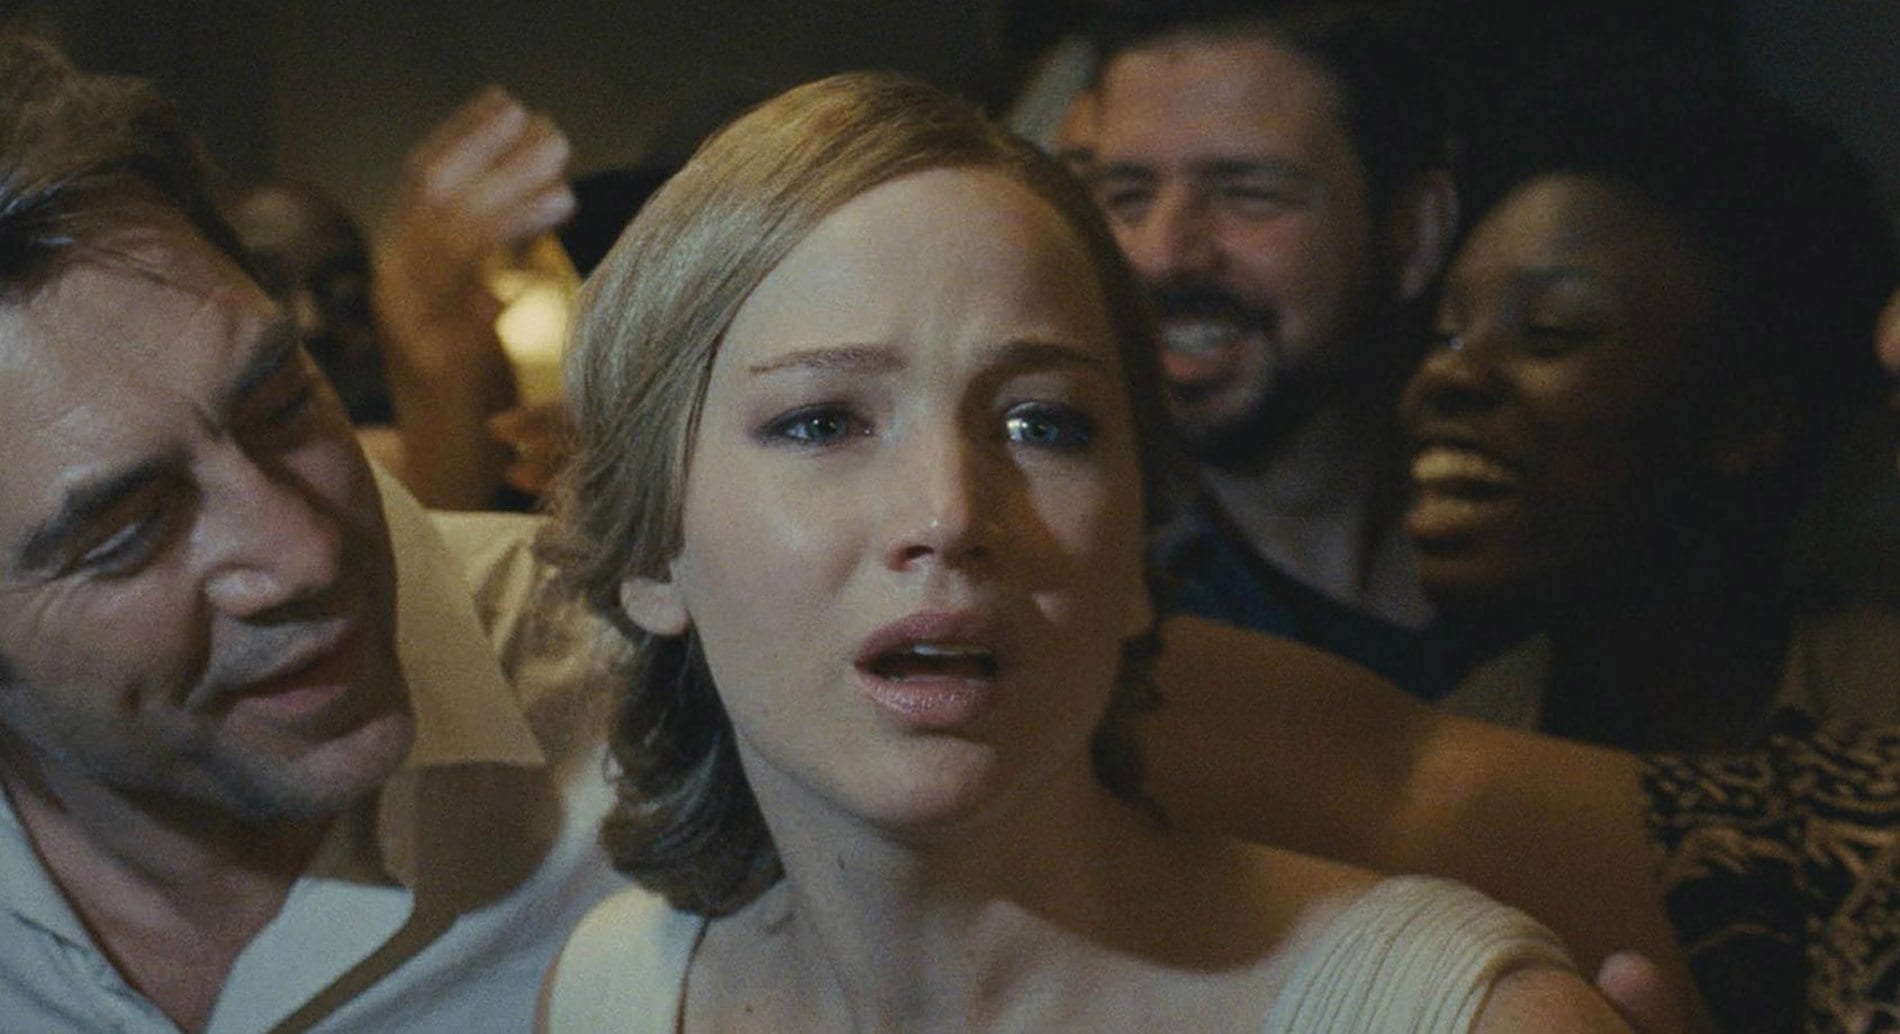 From the dark ‘Black Swan’ to the epic ‘Noah’ to last year’s trippy ‘mother!’, these are the most divisive moments of Darren Aronofsky's entire career.